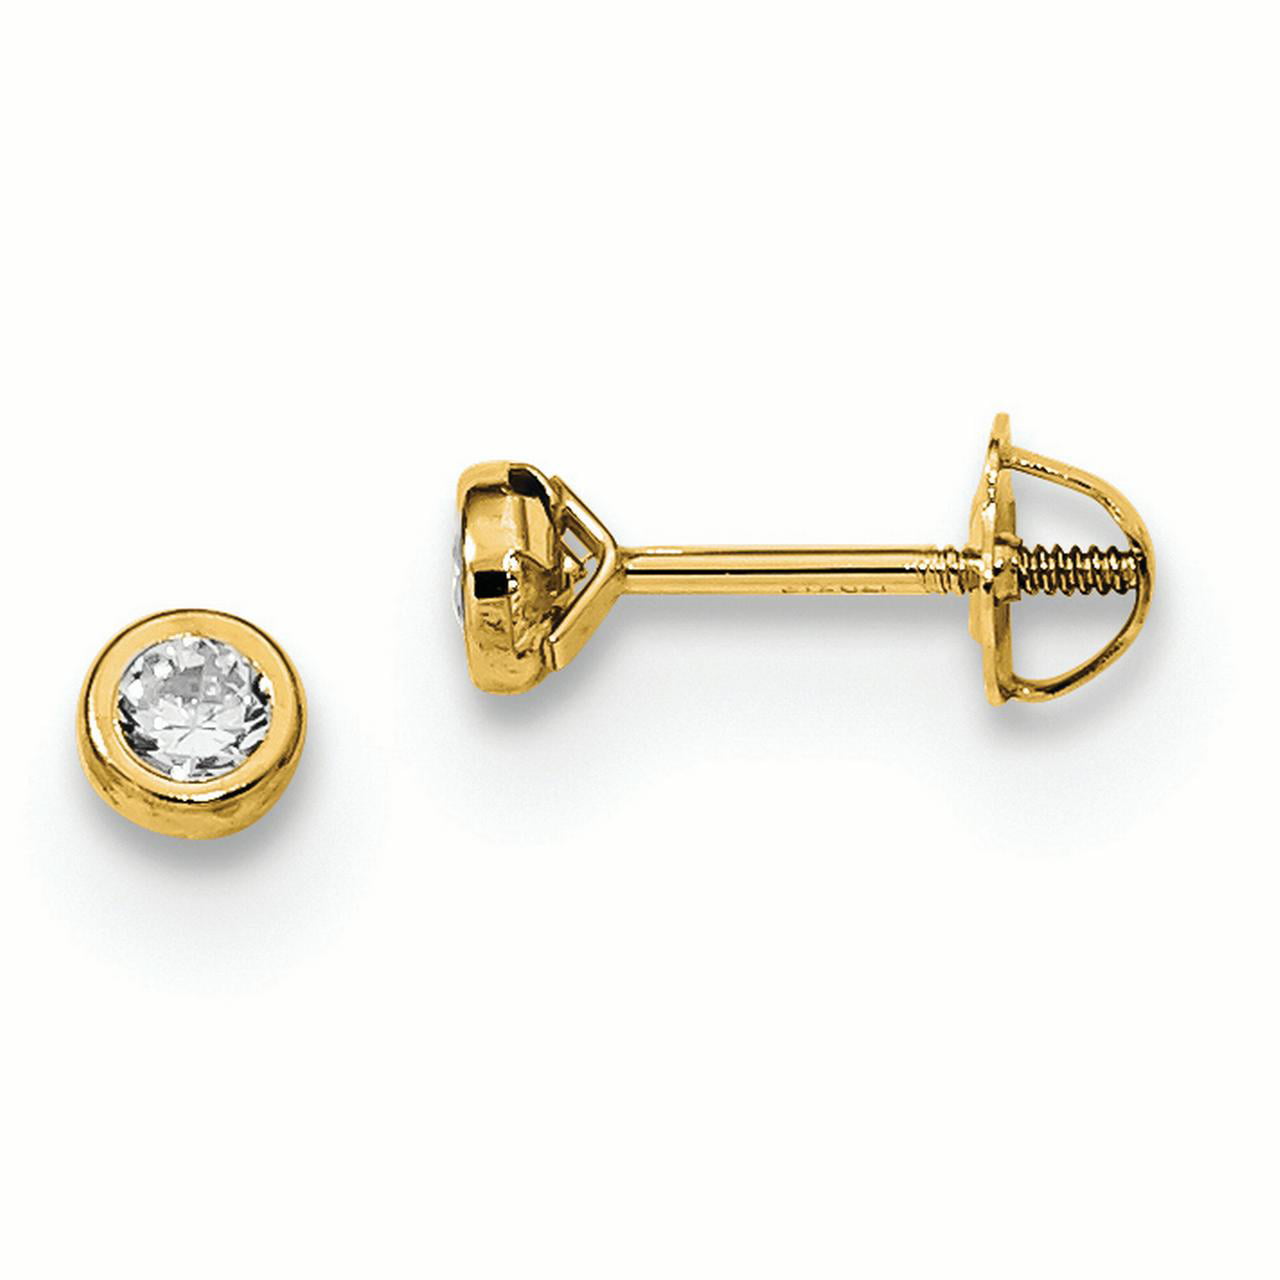 Details about   14K Yellow Gold Madi K Children's 6 MM CZ Reindeer Post Stud Earrings MSRP $117 